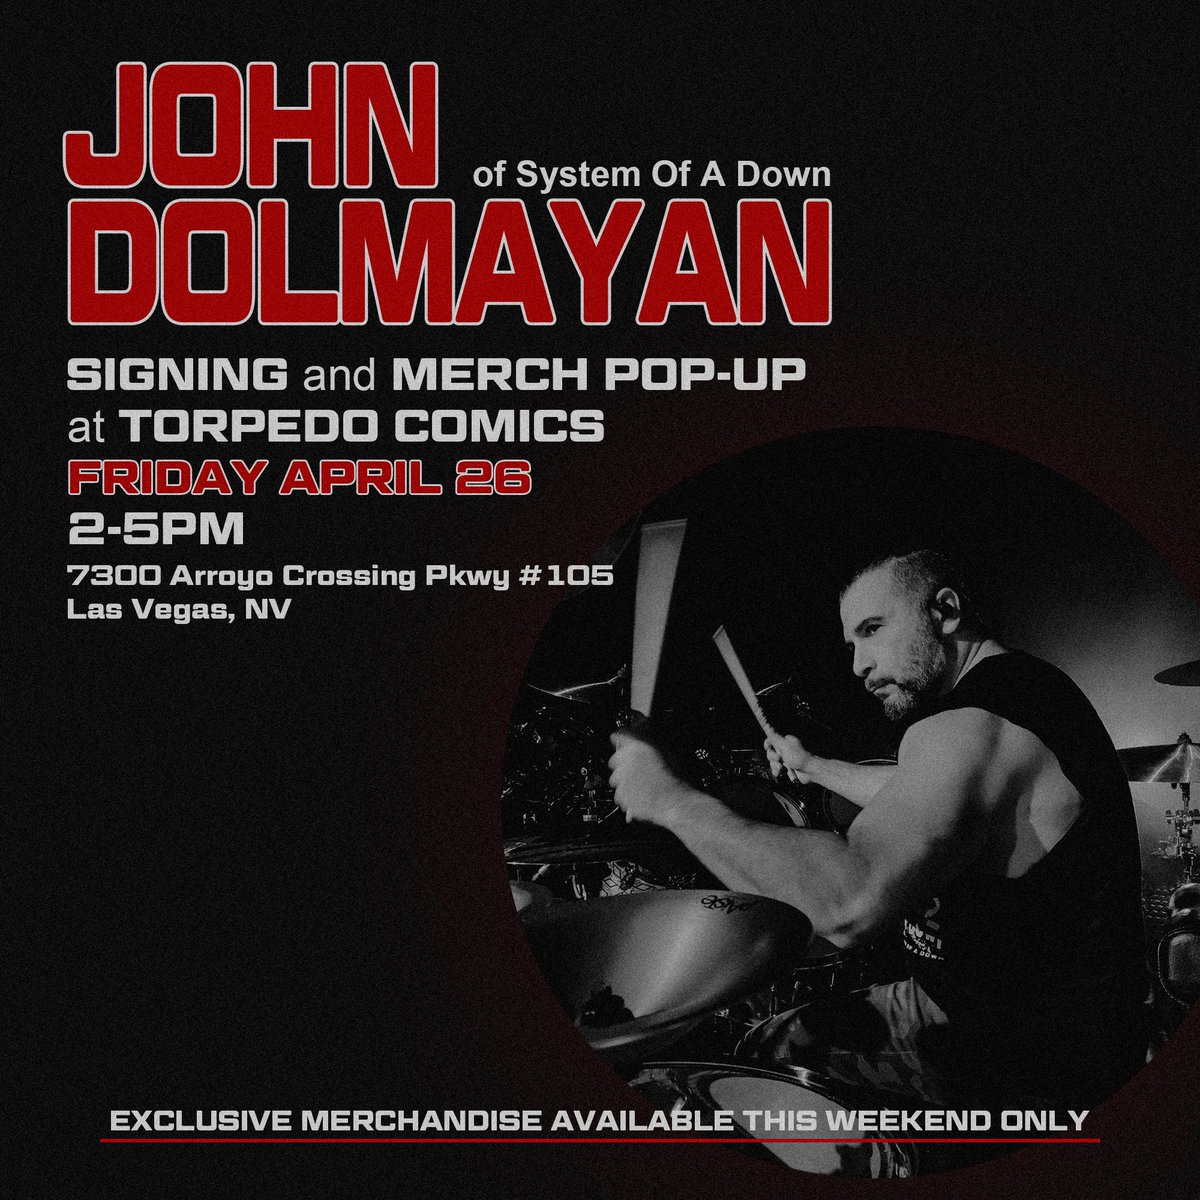 Las Vegas, head to @TorpedoComicsLV next Friday, 4/26, for a signing with @JohnDolmayan, along with an exclusive SOAD merch pop-up at his comic book shop. Merch is limited and will only be available that weekend.